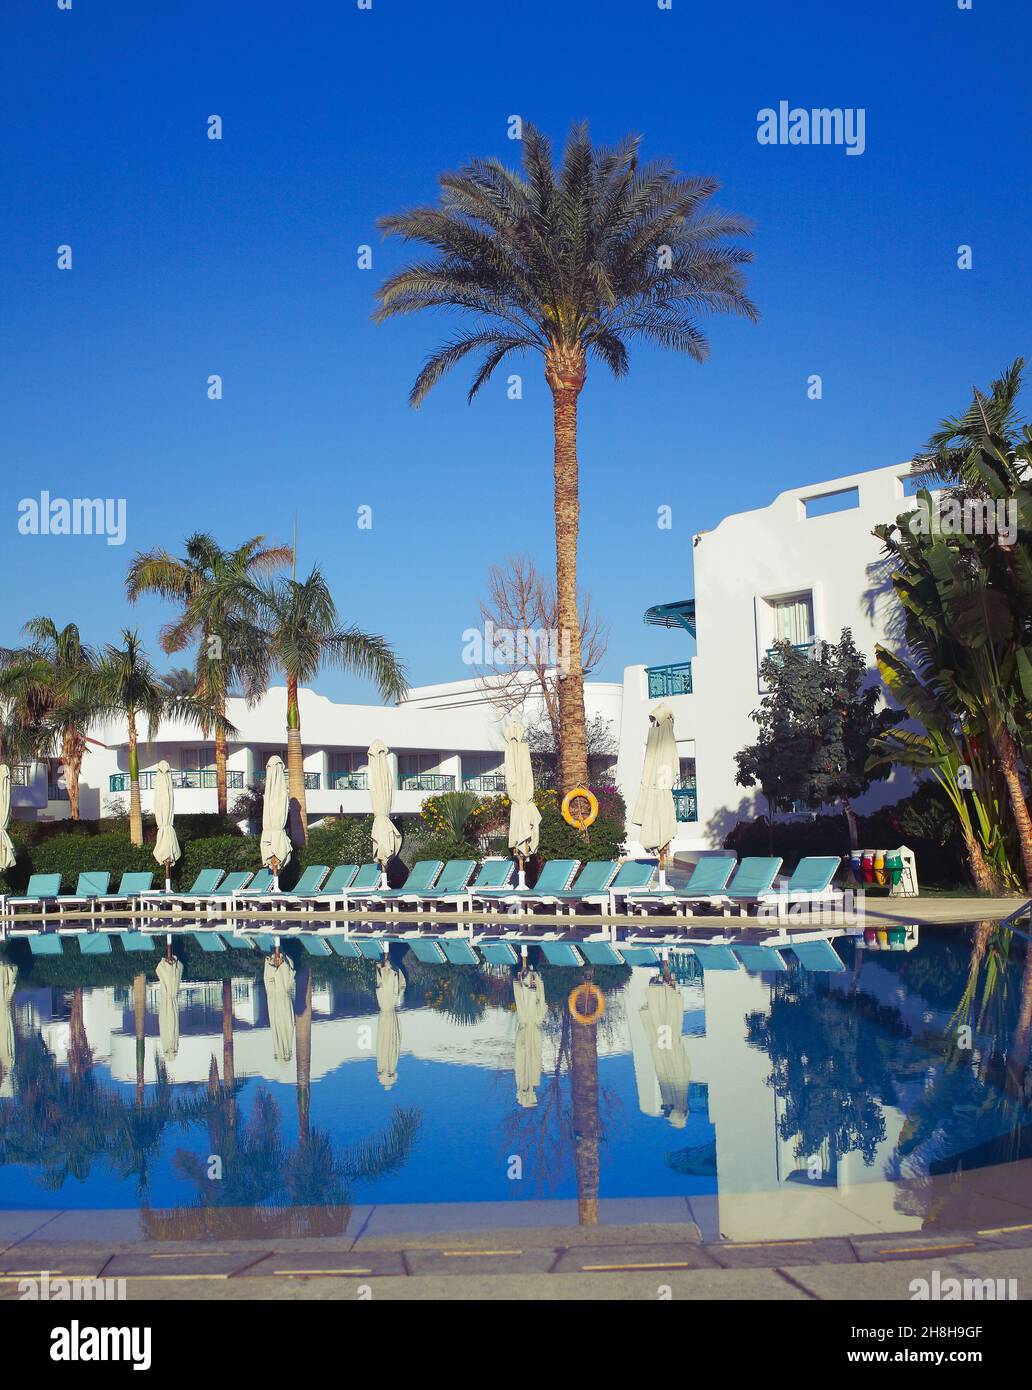 Swimming pool surrounded by sun beds and palm trees under at the hotel. Stock Photo